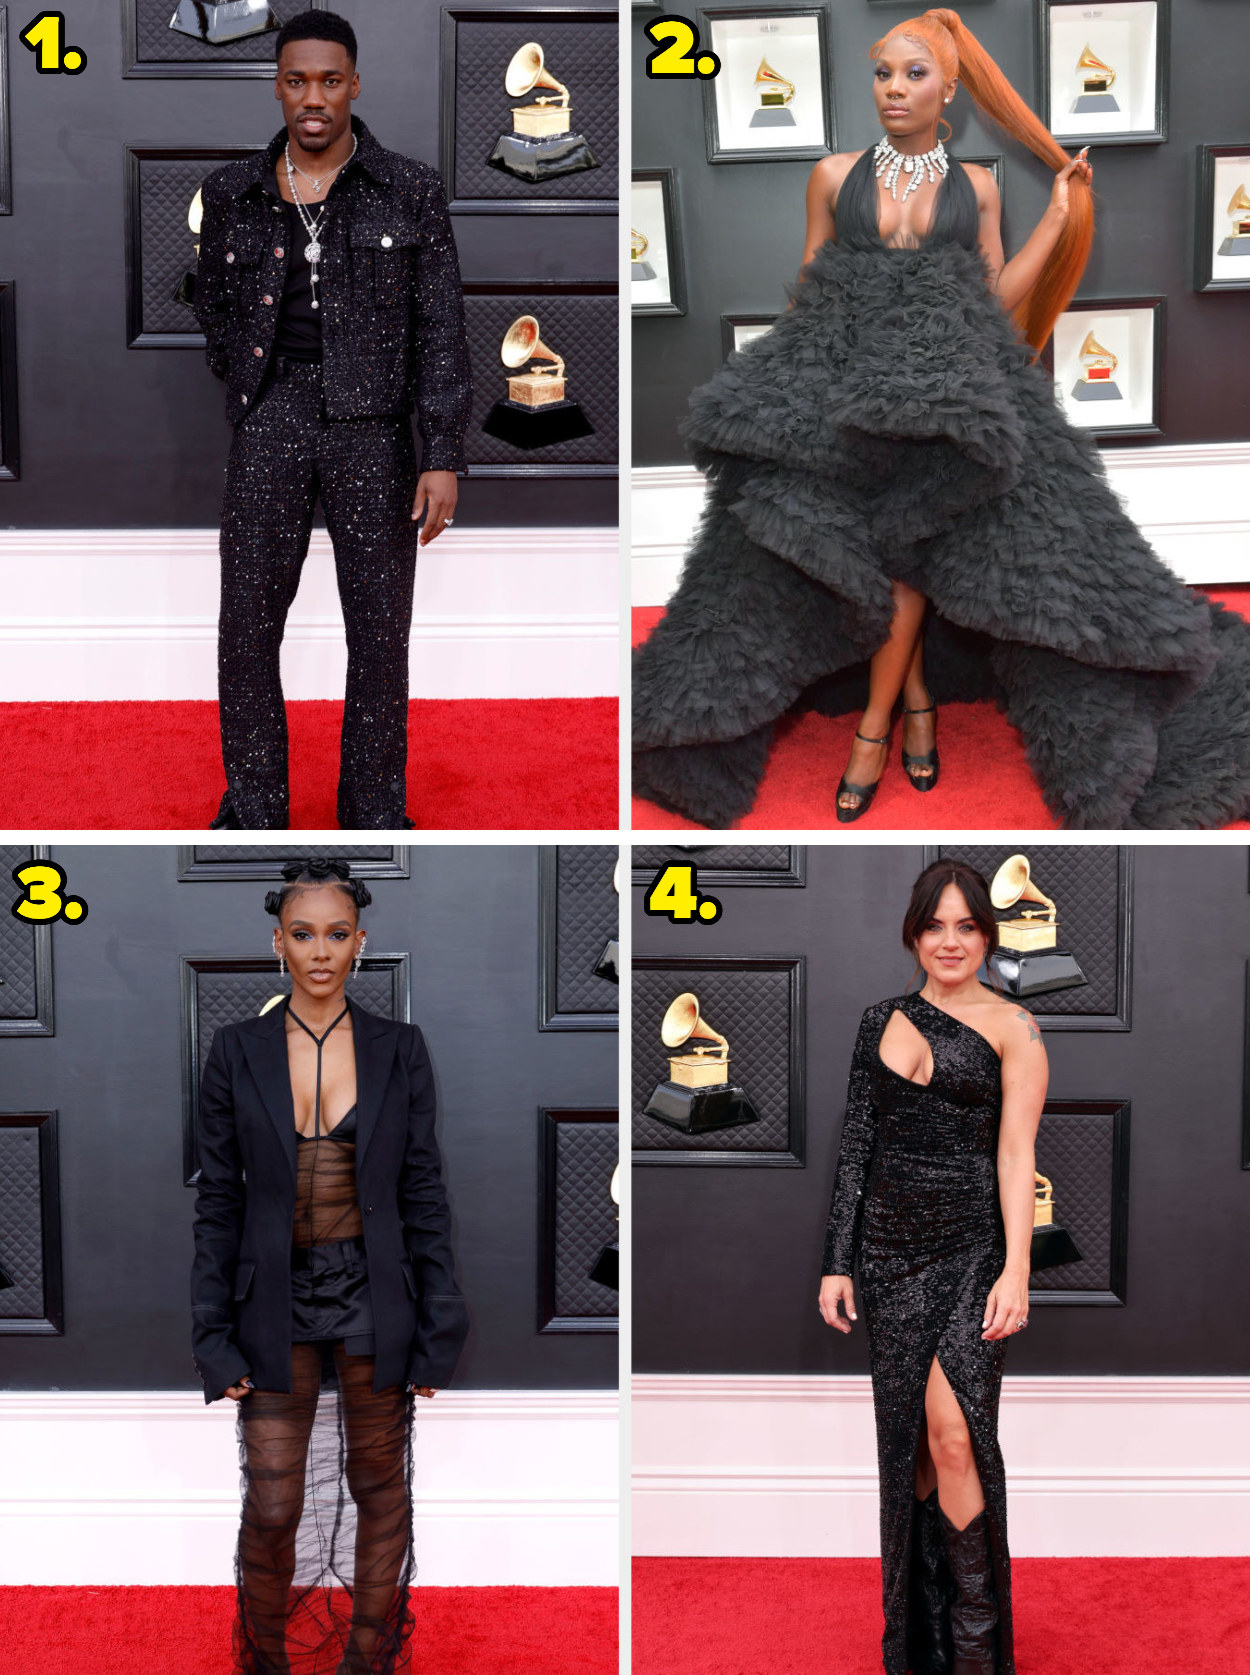 1. A printed suit with long necklaces. 2. A halter dress with a huge poofy asymmetrical skirt. 3. A sheer ruched dress with a blazer on top. 4. A glittery one-shoulder gown with a cutout by the shoulder and a thigh slit.